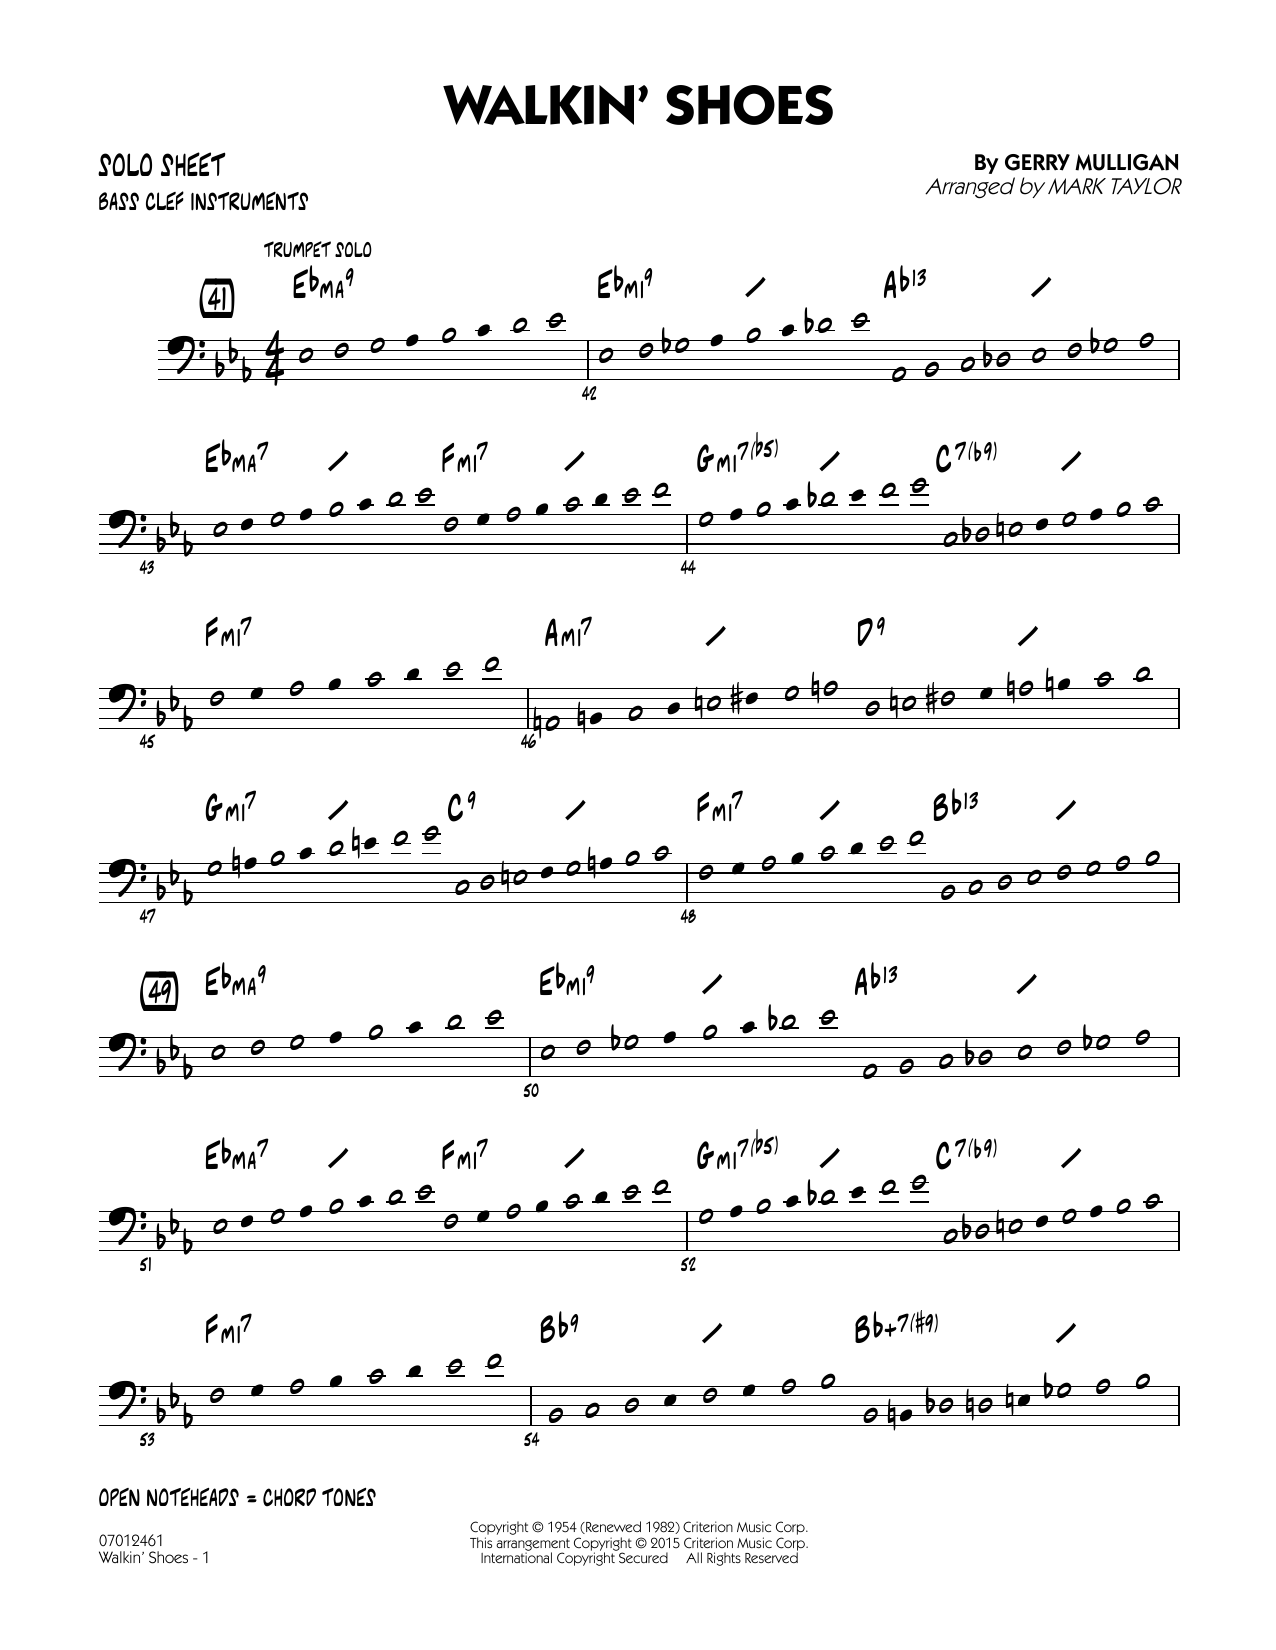 Mark Taylor Walkin' Shoes - Bass Clef Solo Sheet sheet music notes and chords. Download Printable PDF.